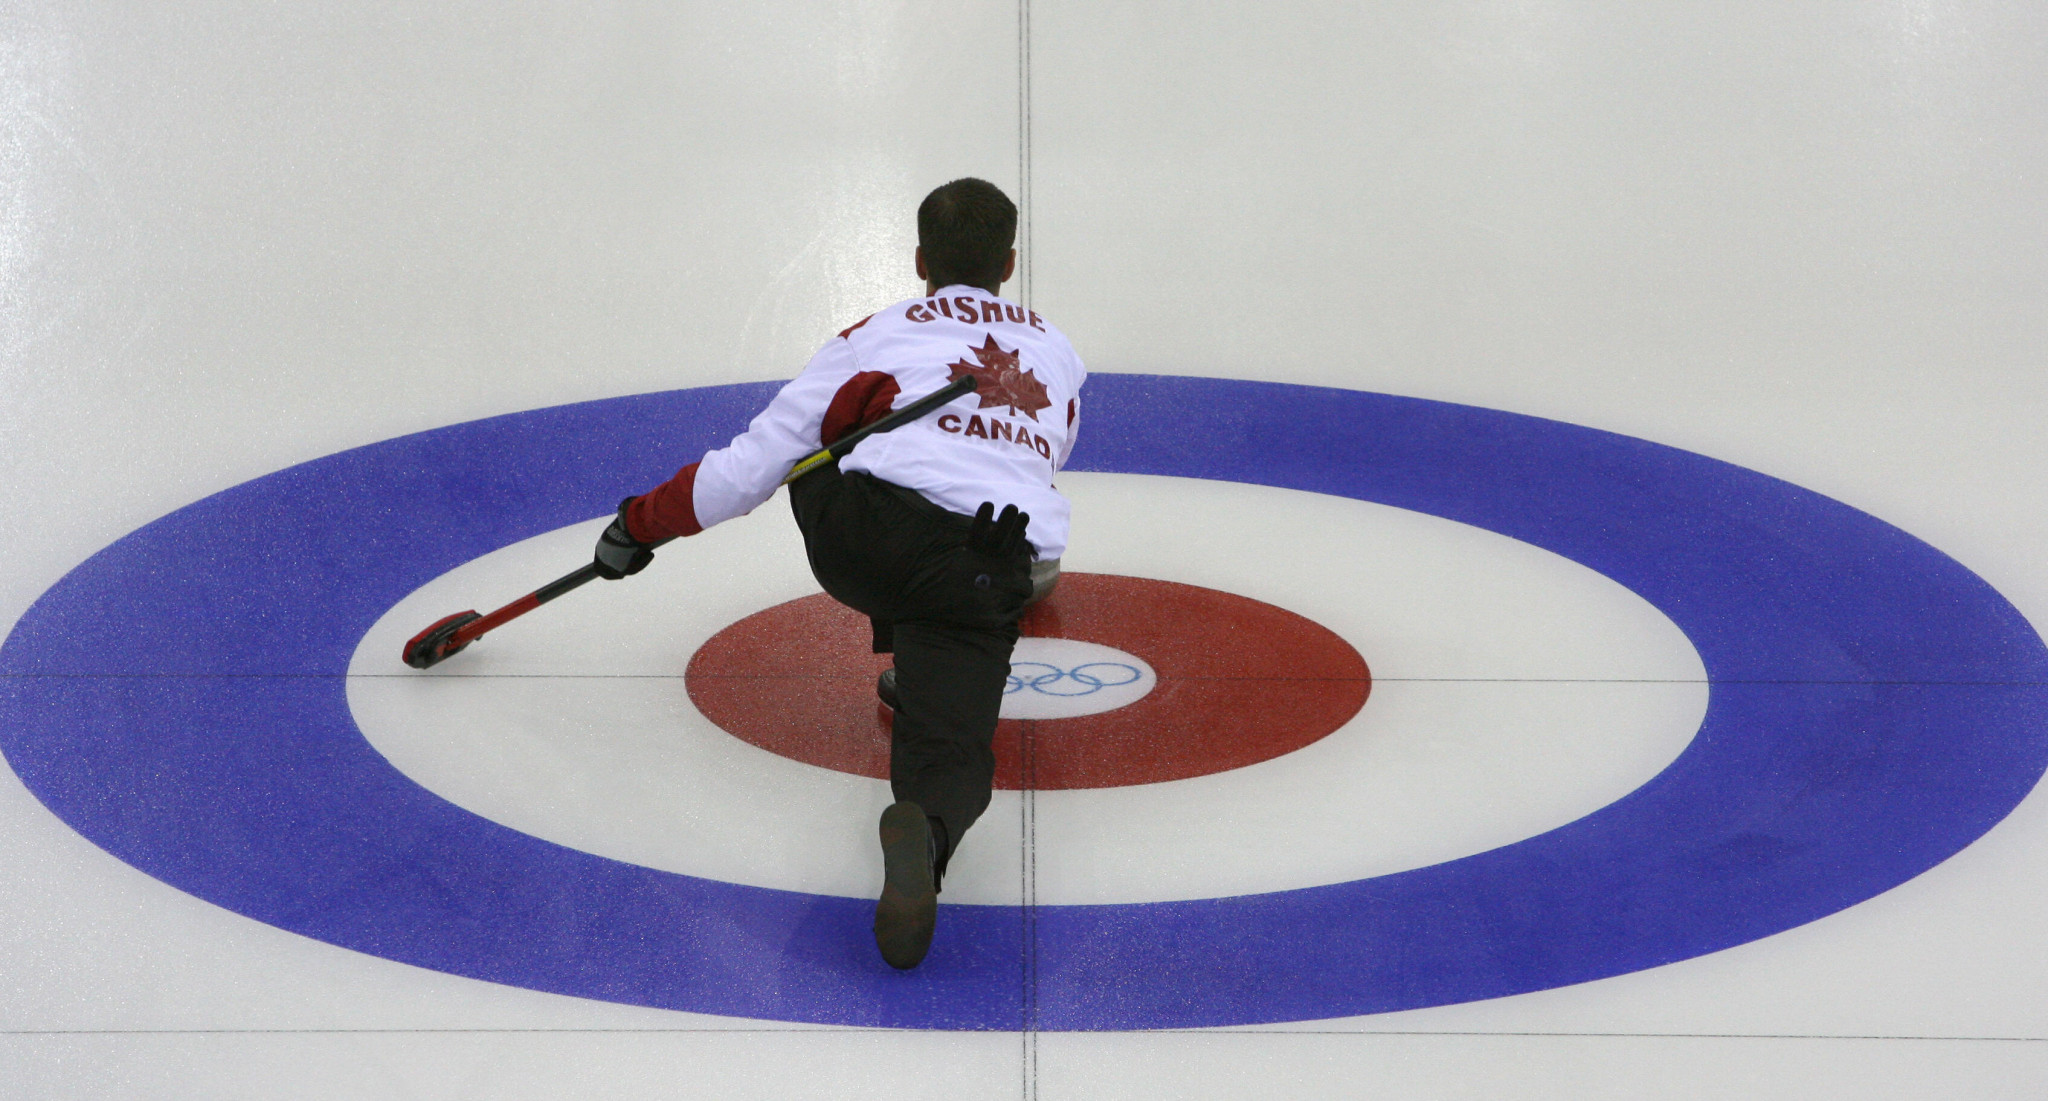 Proven Seed is one of three Curling Canada official suppliers alongisde AMJ Campbell and PointsBet ©Getty Images